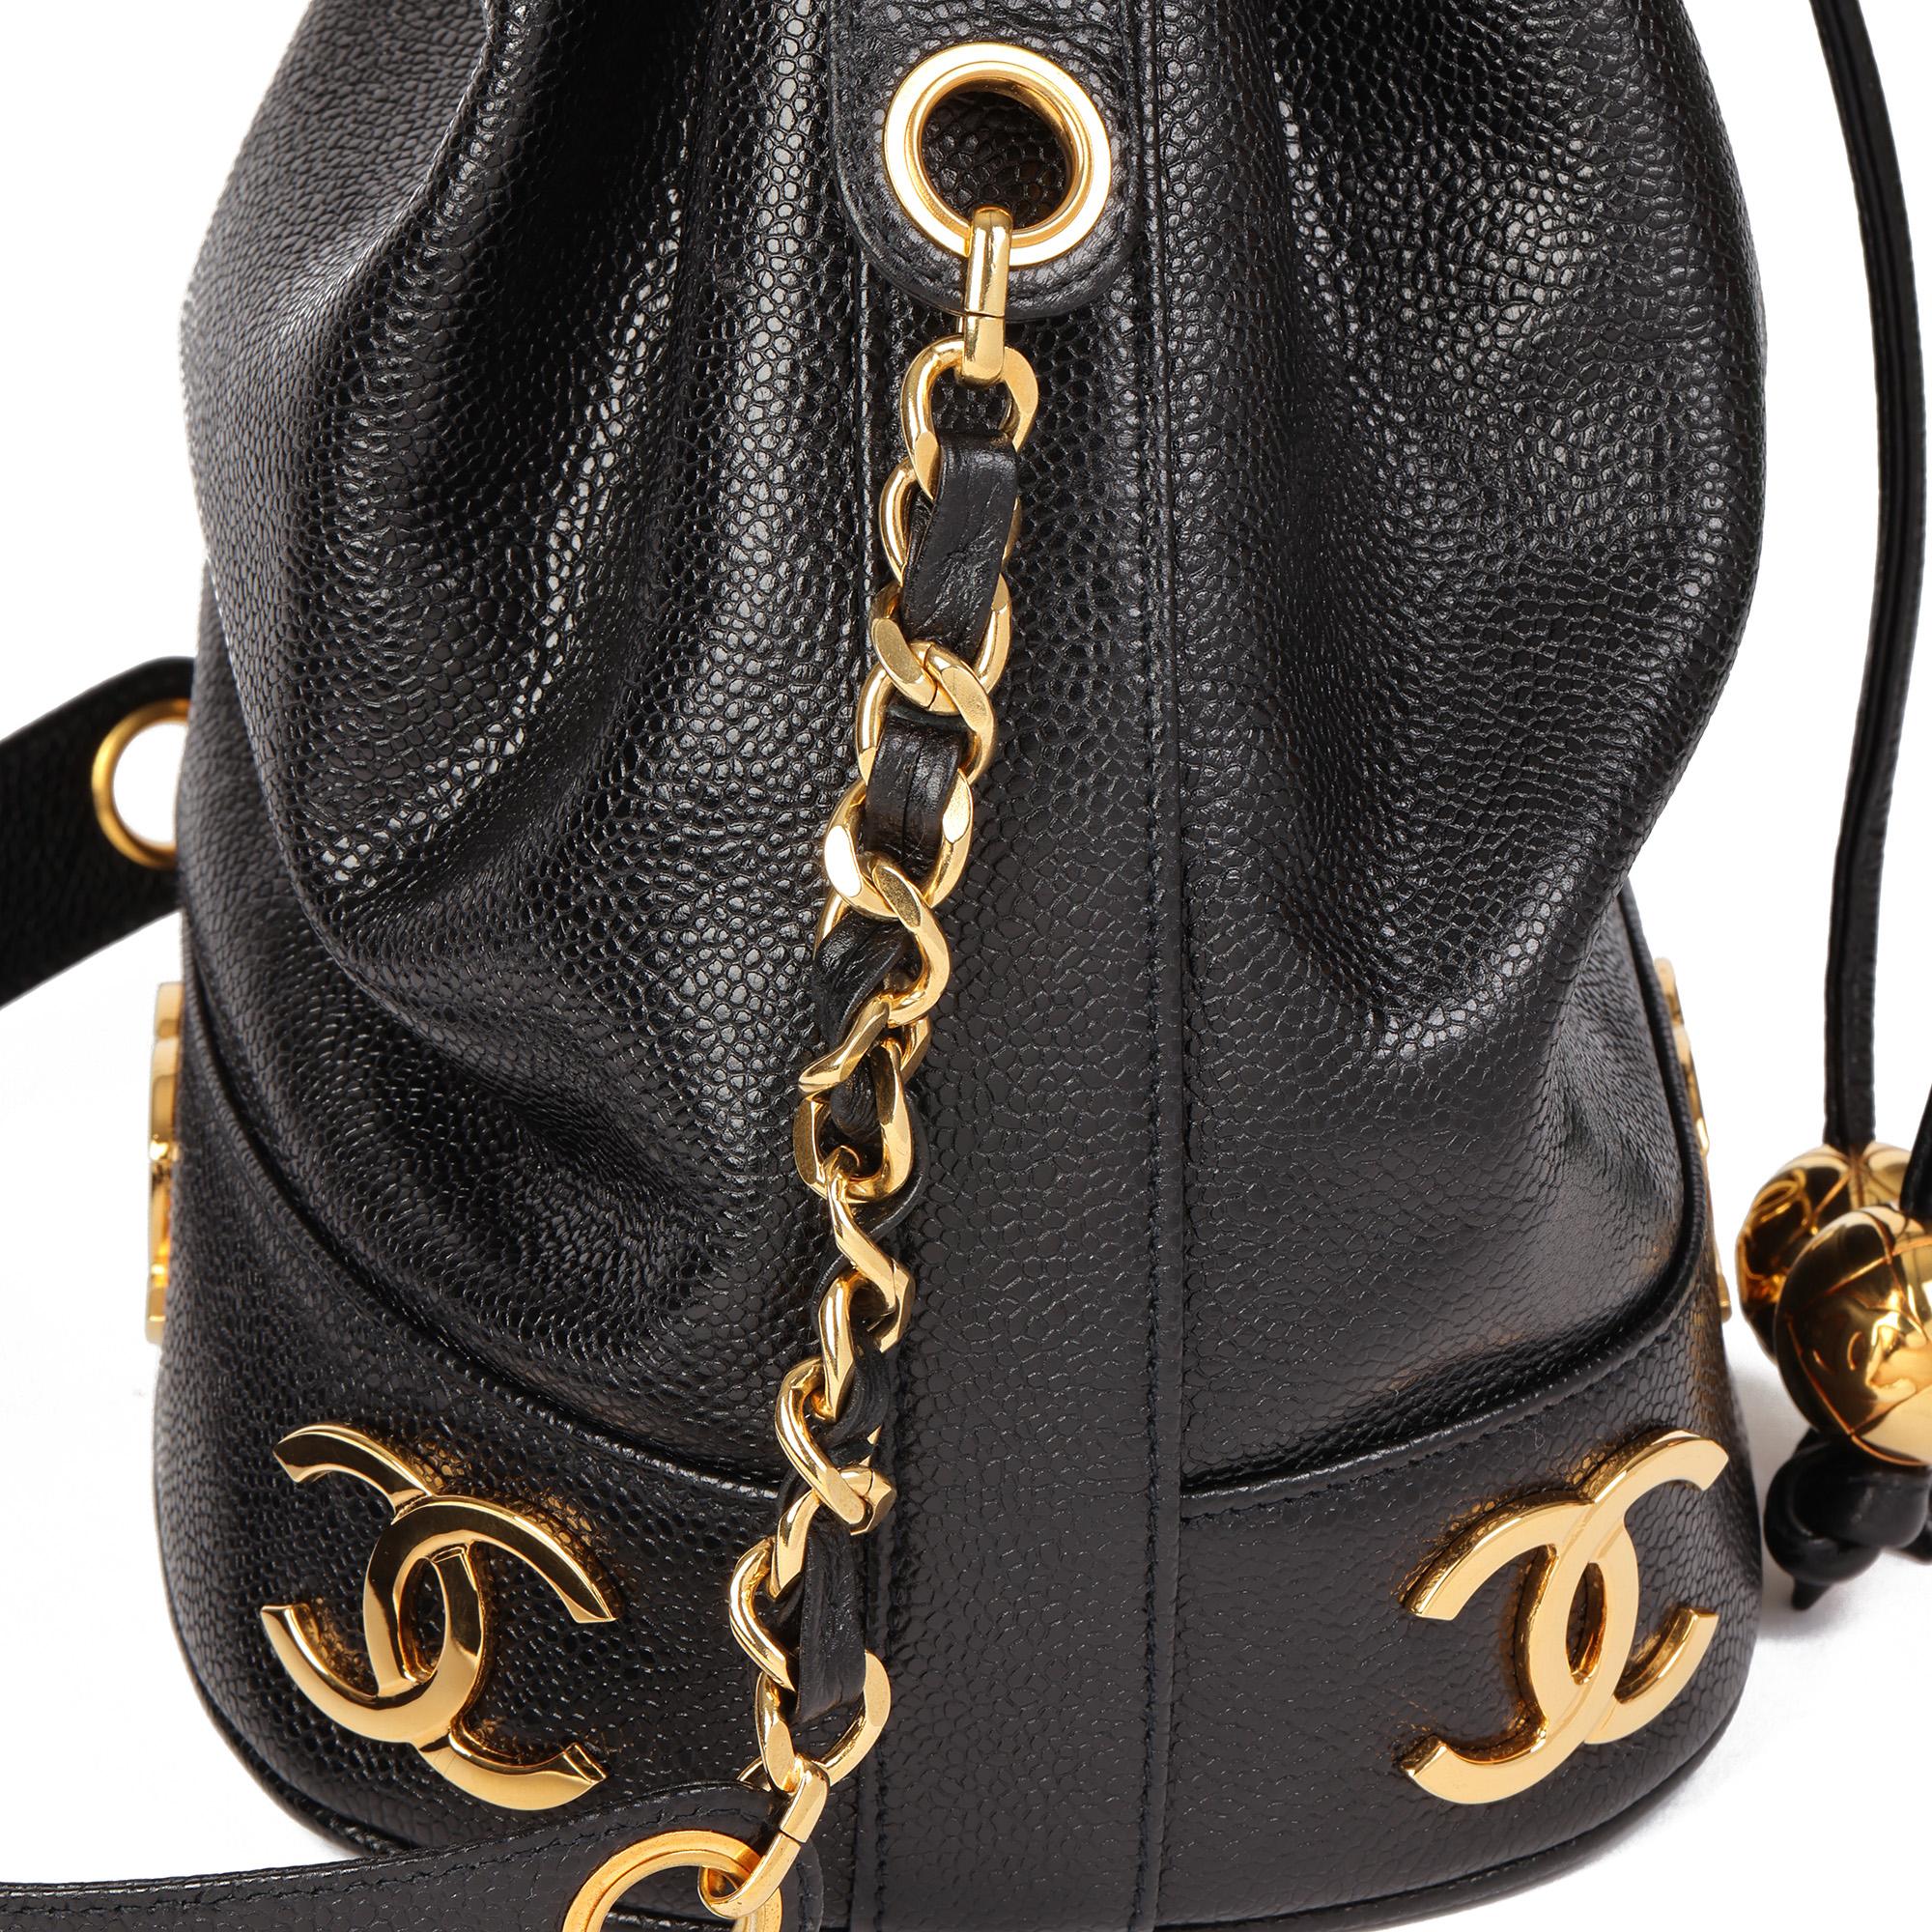 CHANEL Black Caviar Leather Vintage Logo Trim Bucket Bag with Pouch 3